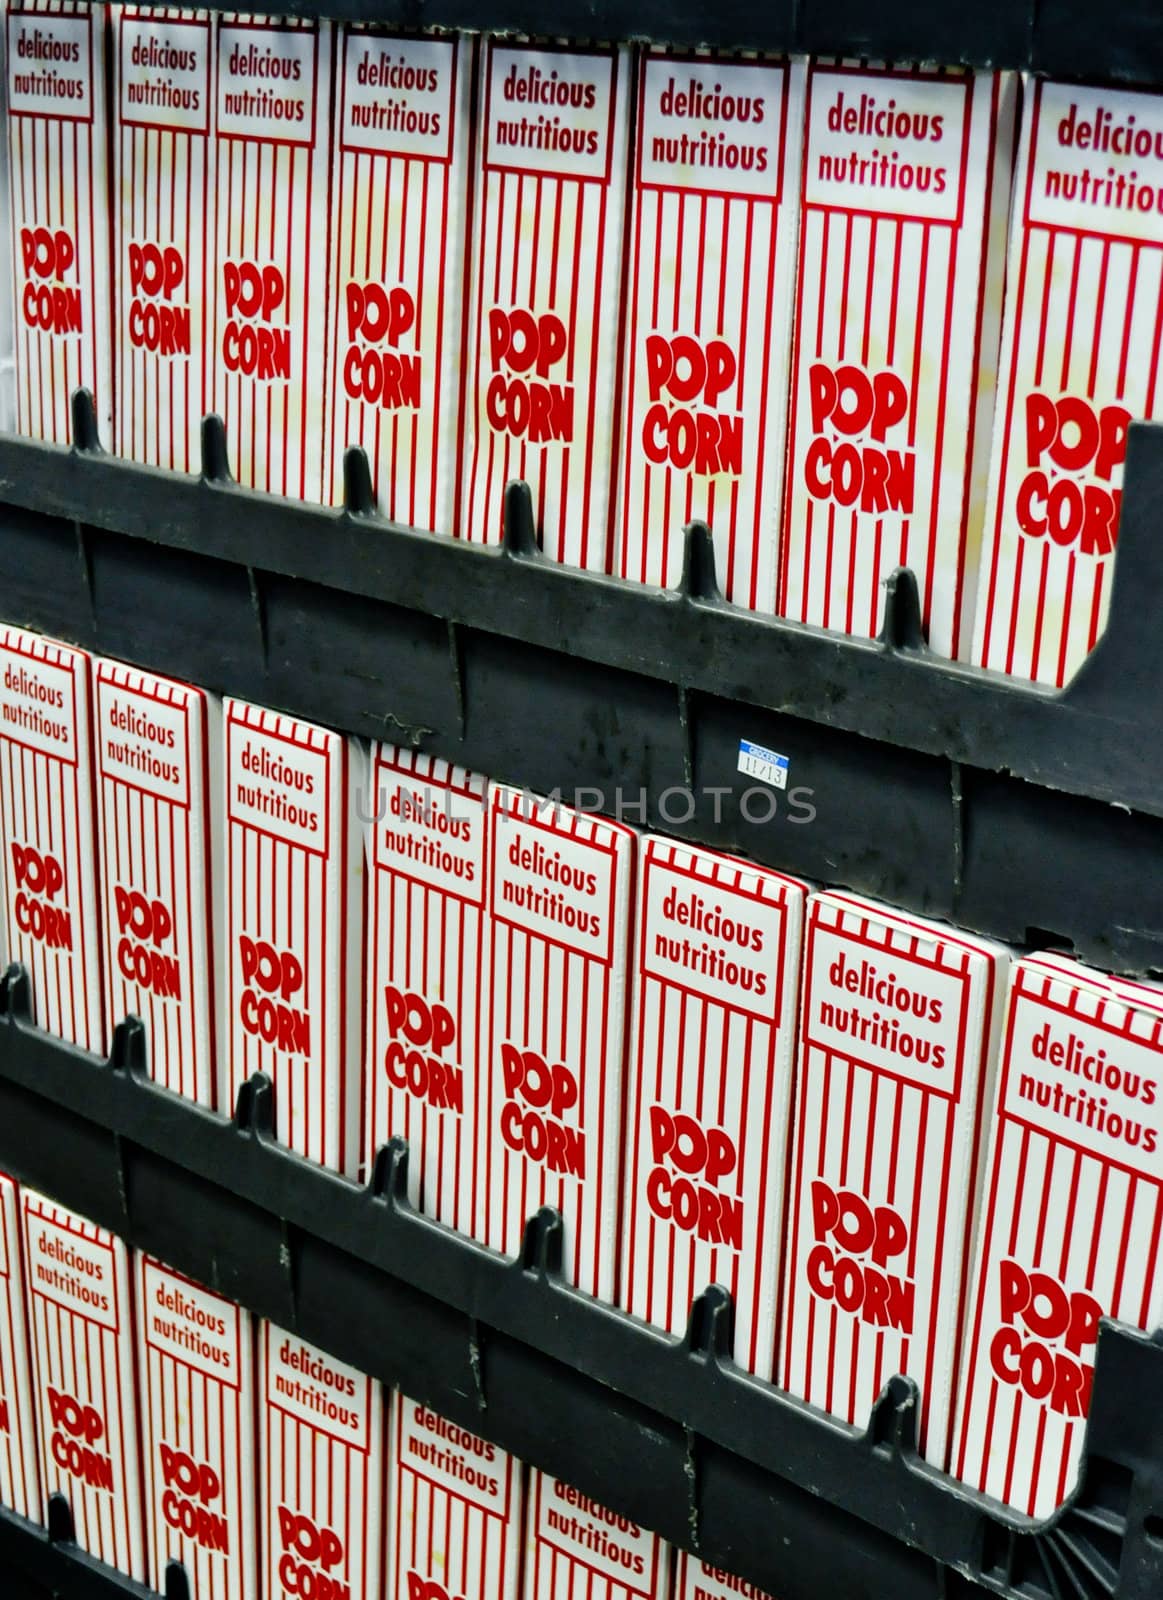 Popcorn Boxes by RefocusPhoto